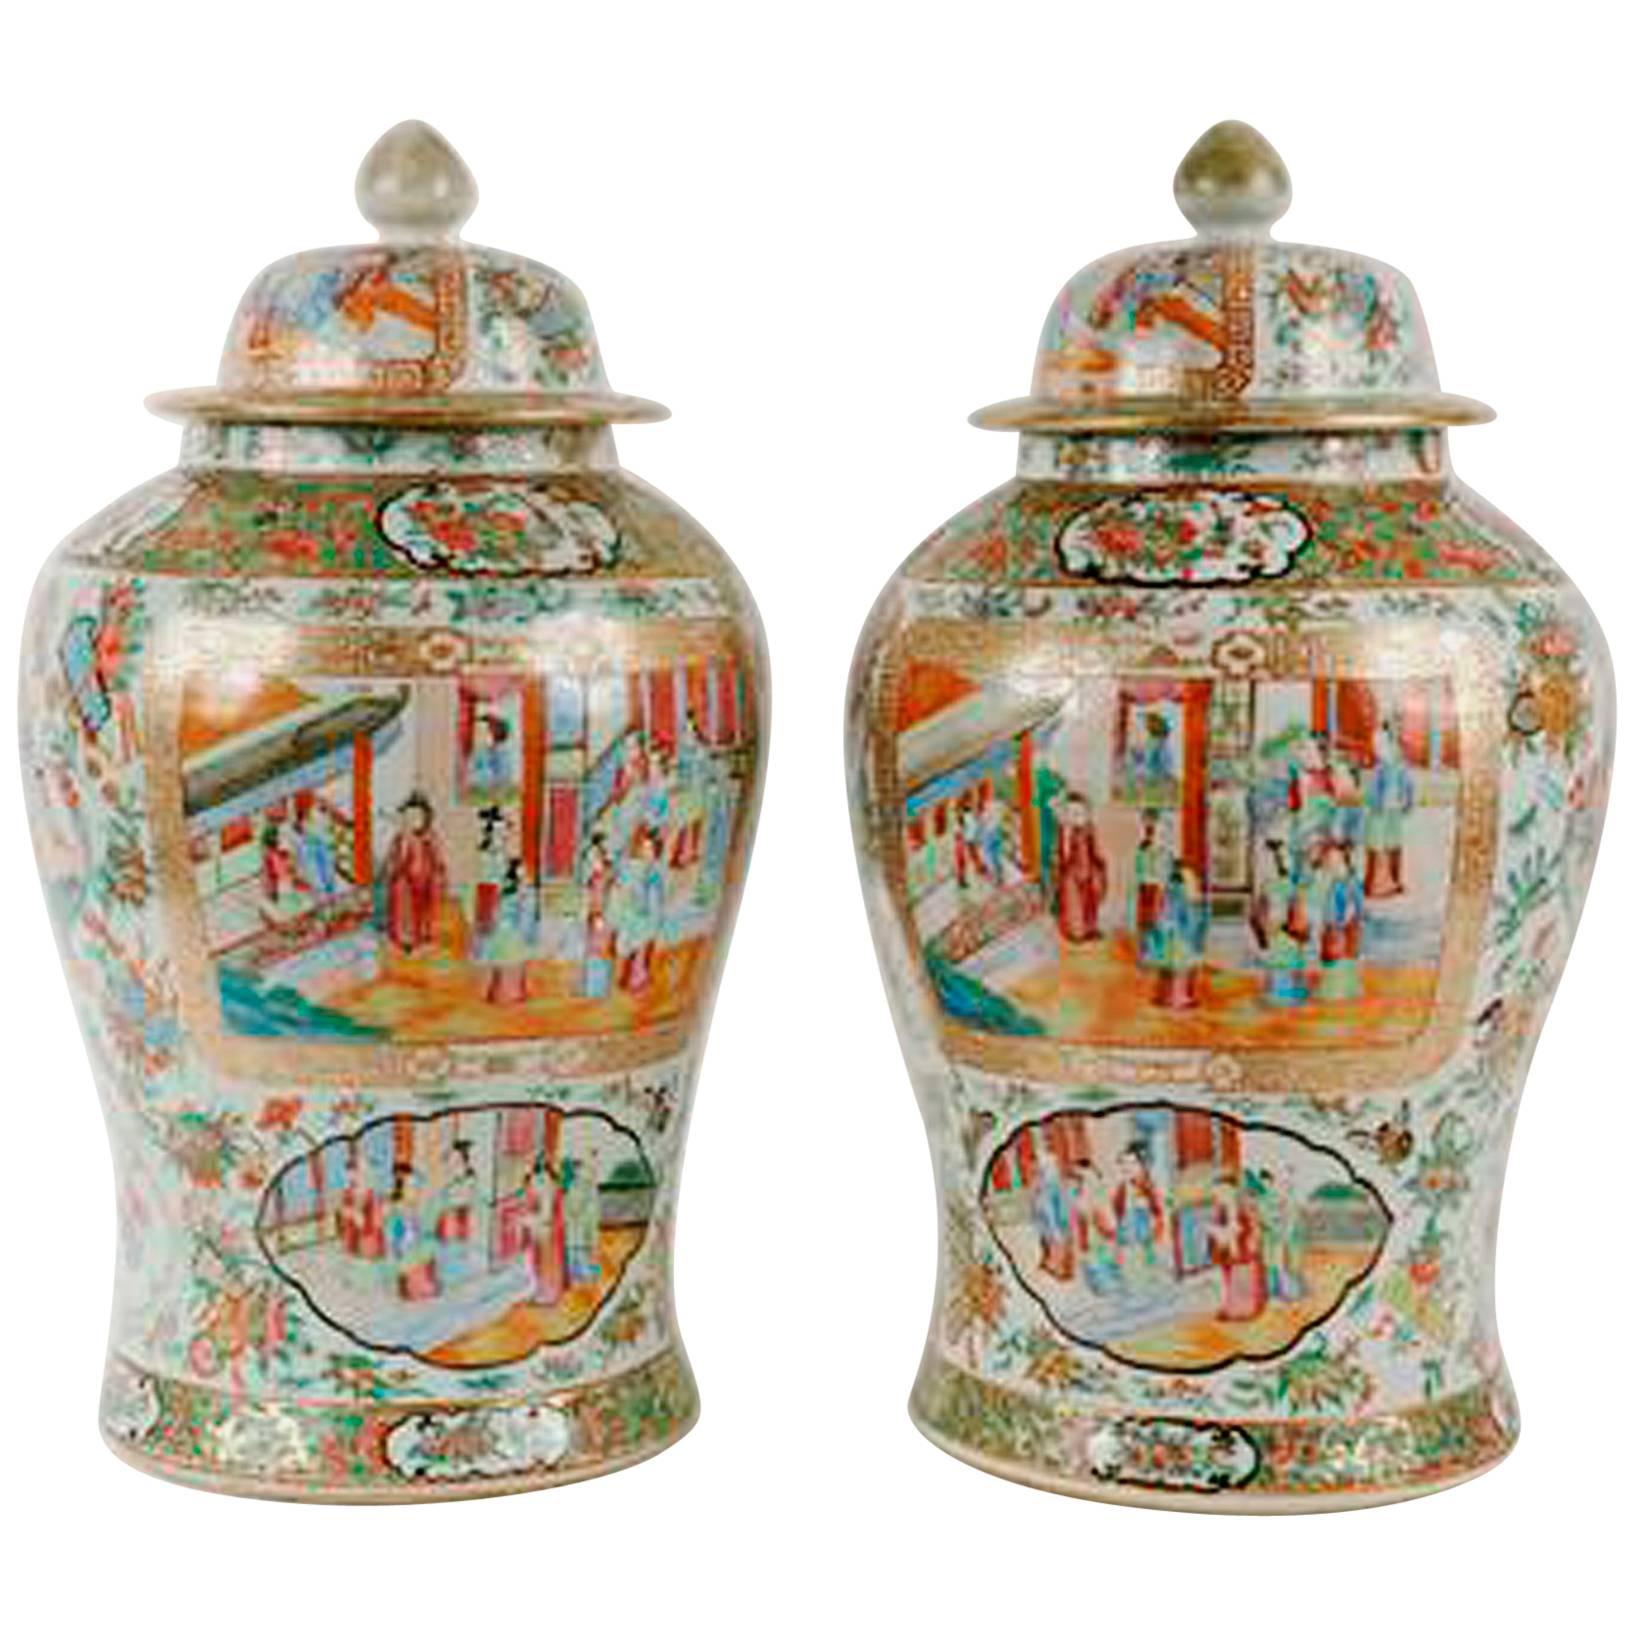 Pair of Chinese Export Porcelain Canton Vases and Covers, circa 1840